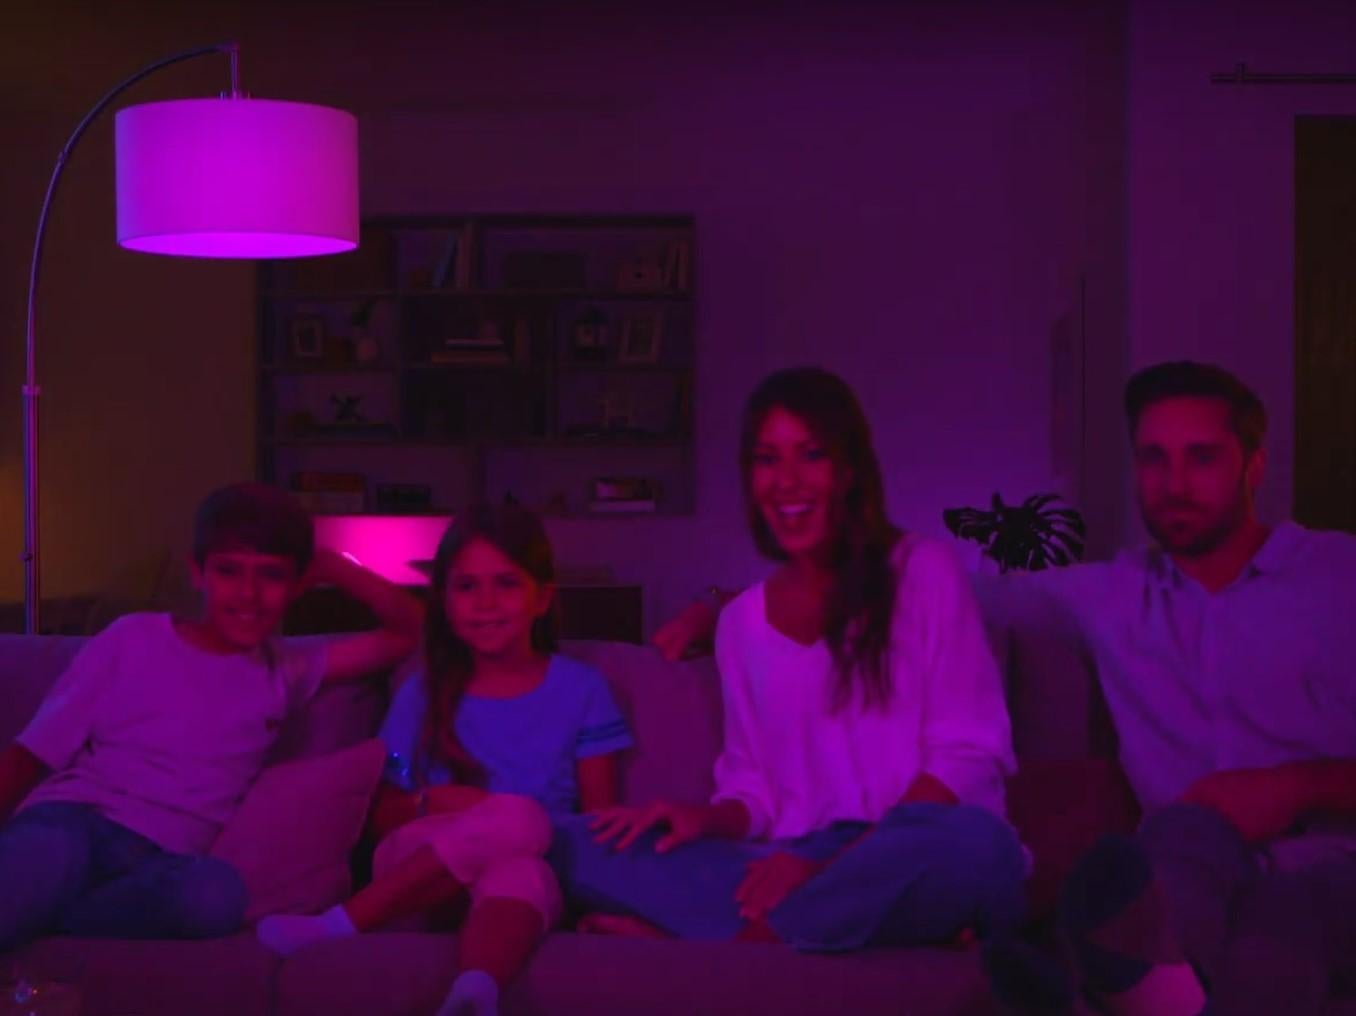 The Philips Hue smart bulb 'could allow hackers to plant spyware' within people's homes (Philips )